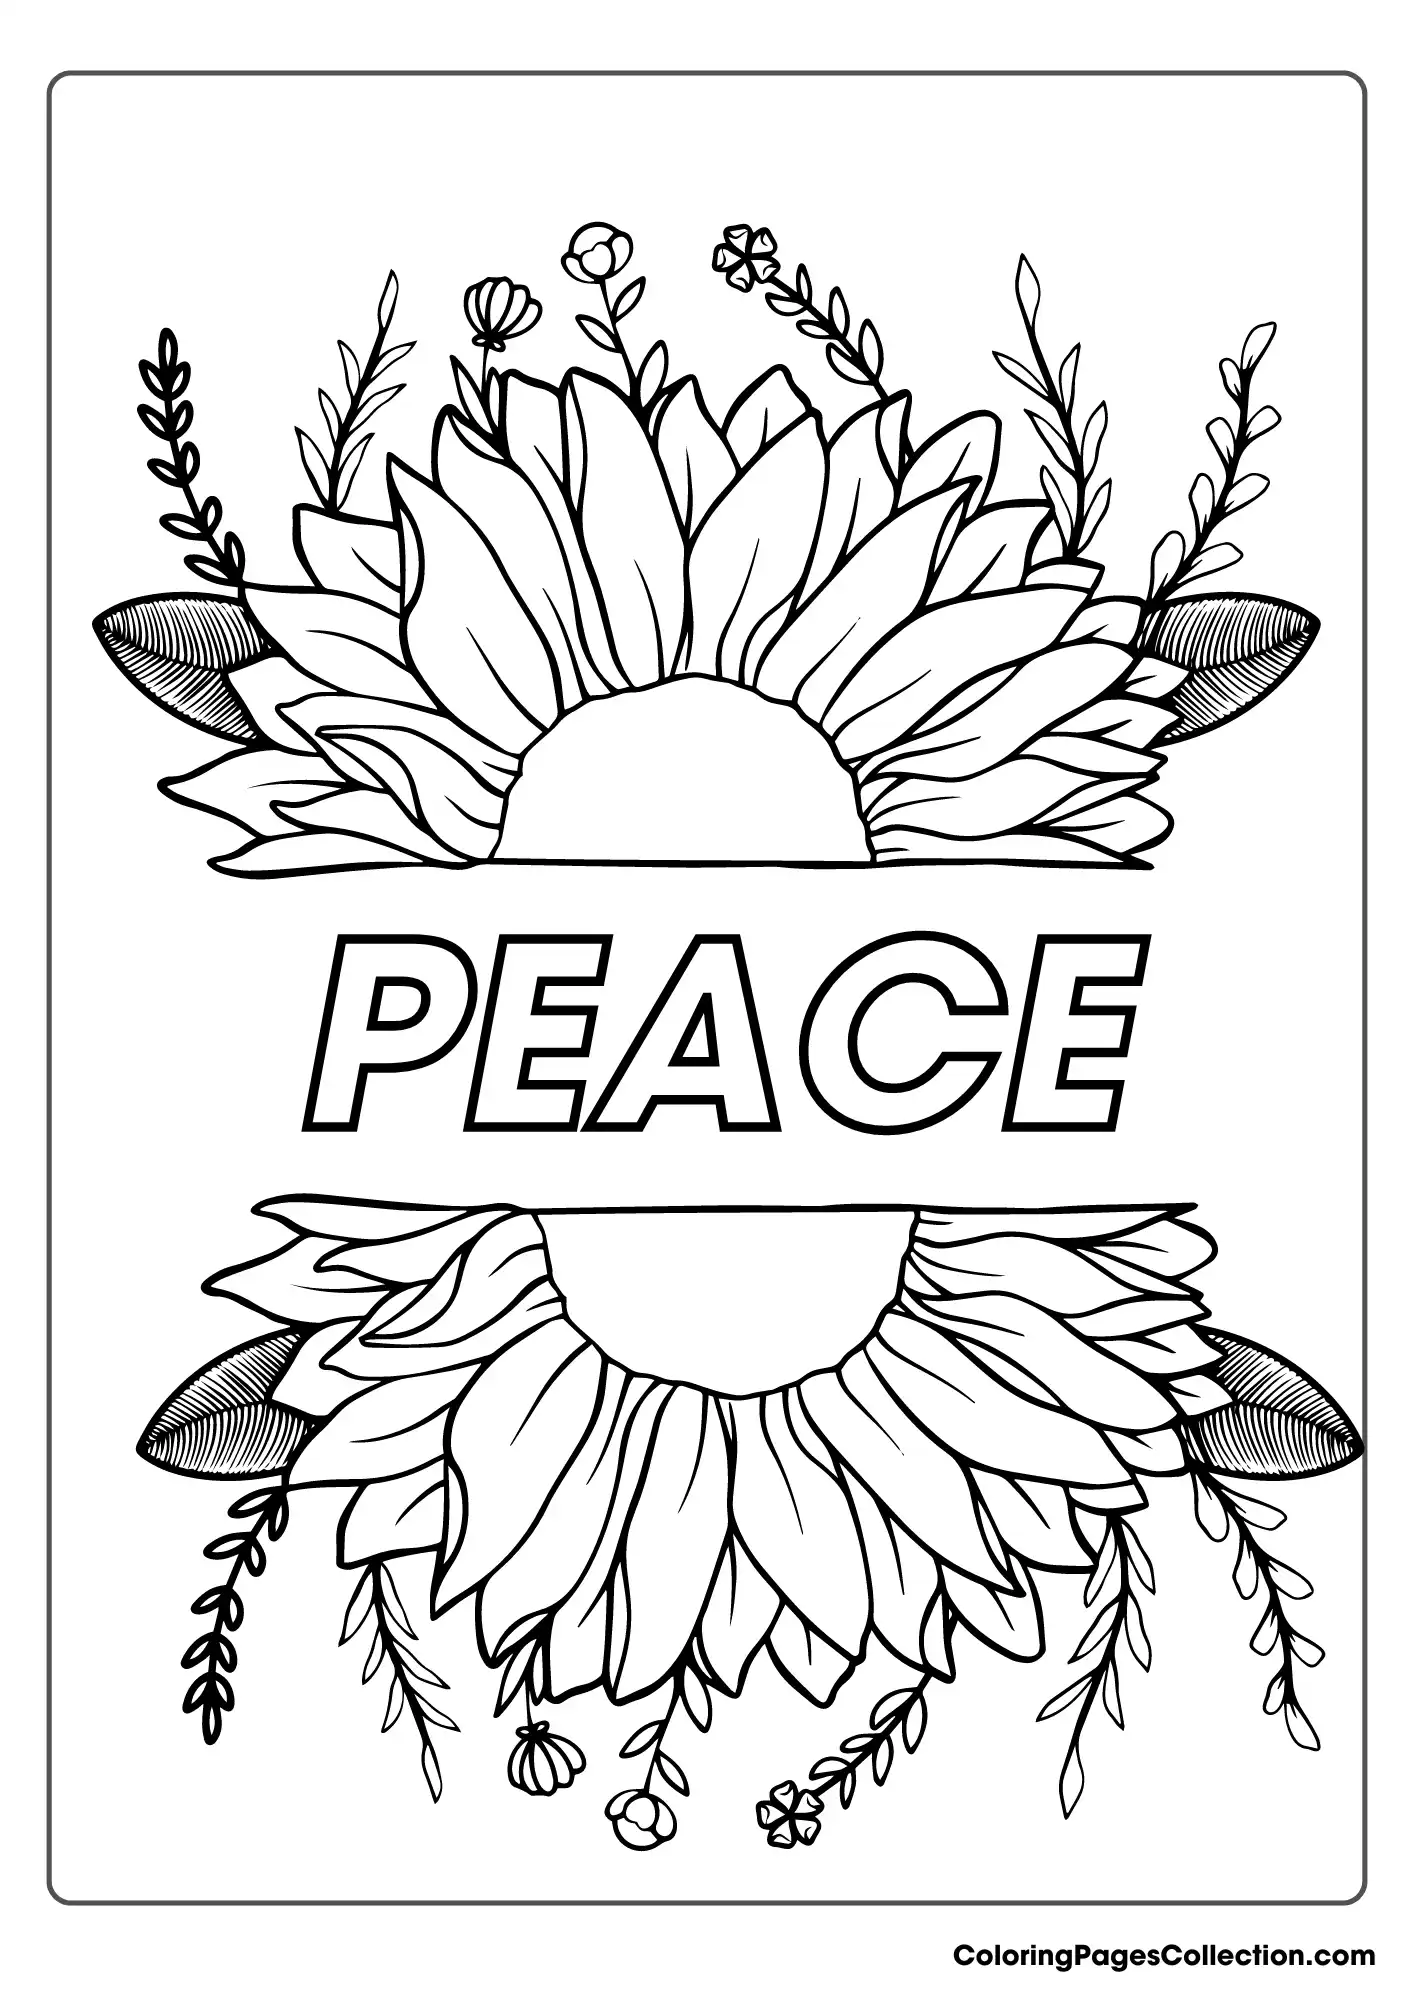 Coloring pages for teens, Peace Coloring Sheet